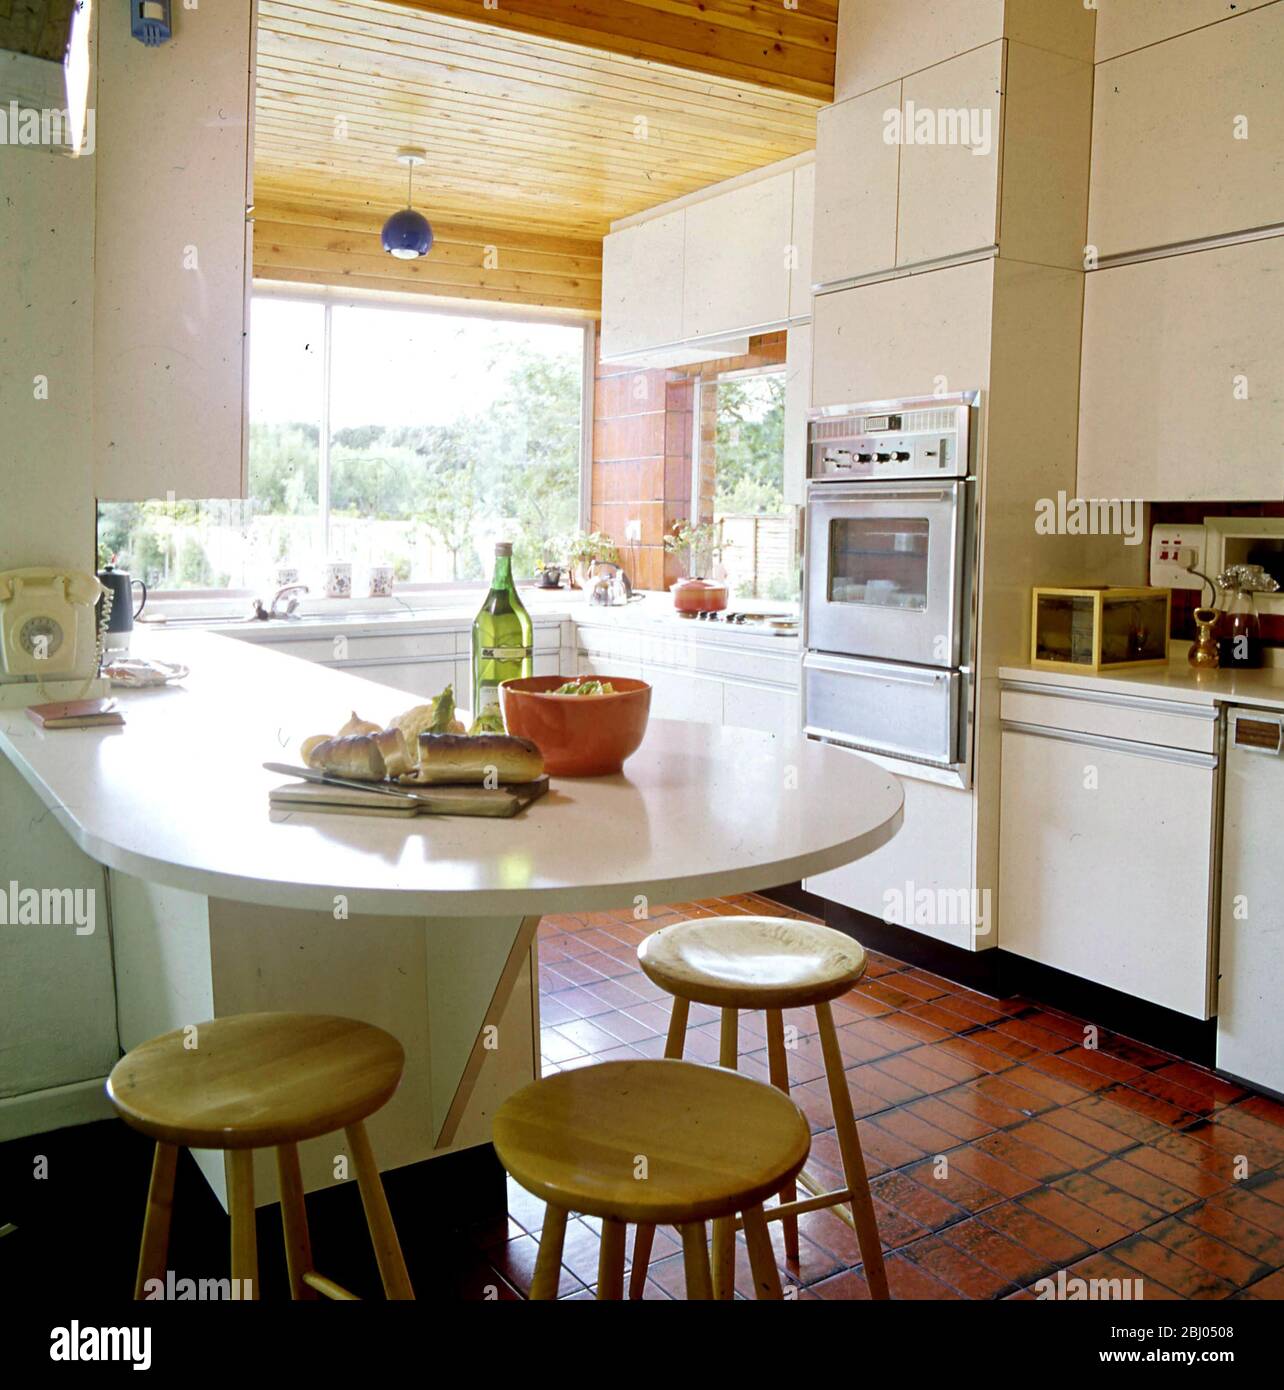 Kitchen 1960s(?) with breakfast bar, tiled floor, wooden ceiling and wall mounted oven - - Stock Photo